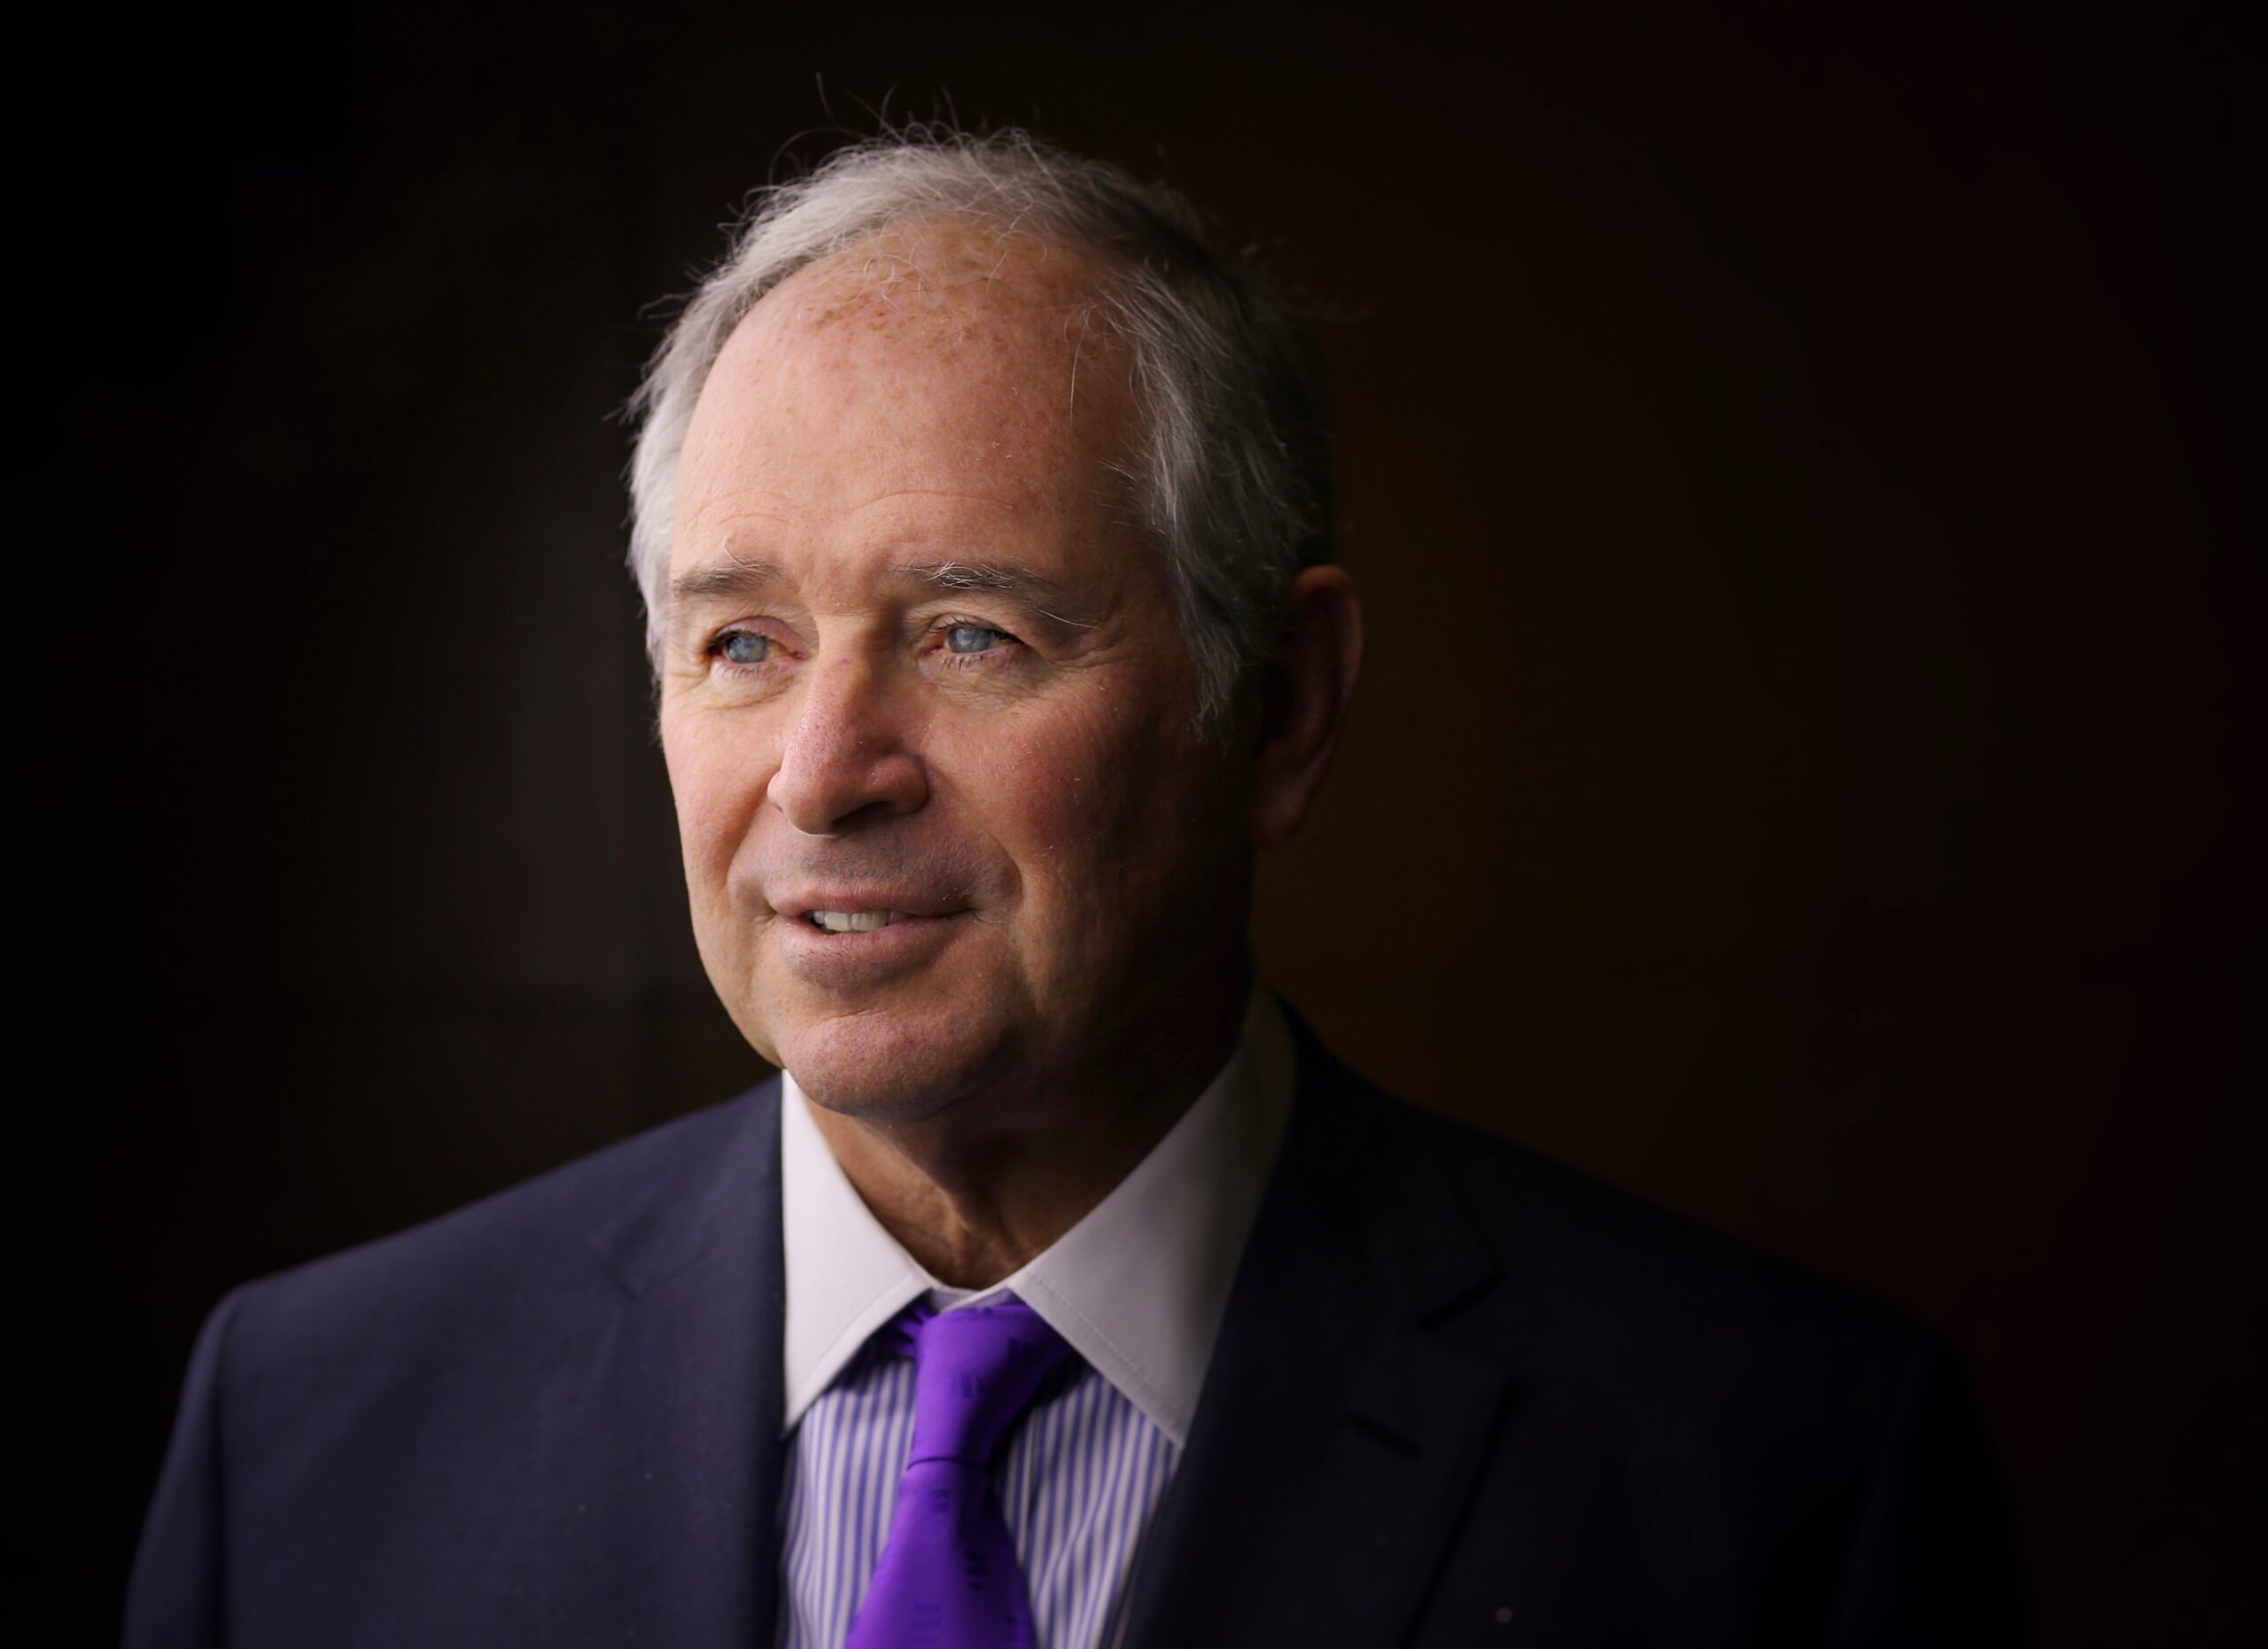 Lessons in Leadership: A Conversation with Stephen A. Schwarzman, Chairman, CEO and Co-Founder of Blackstone